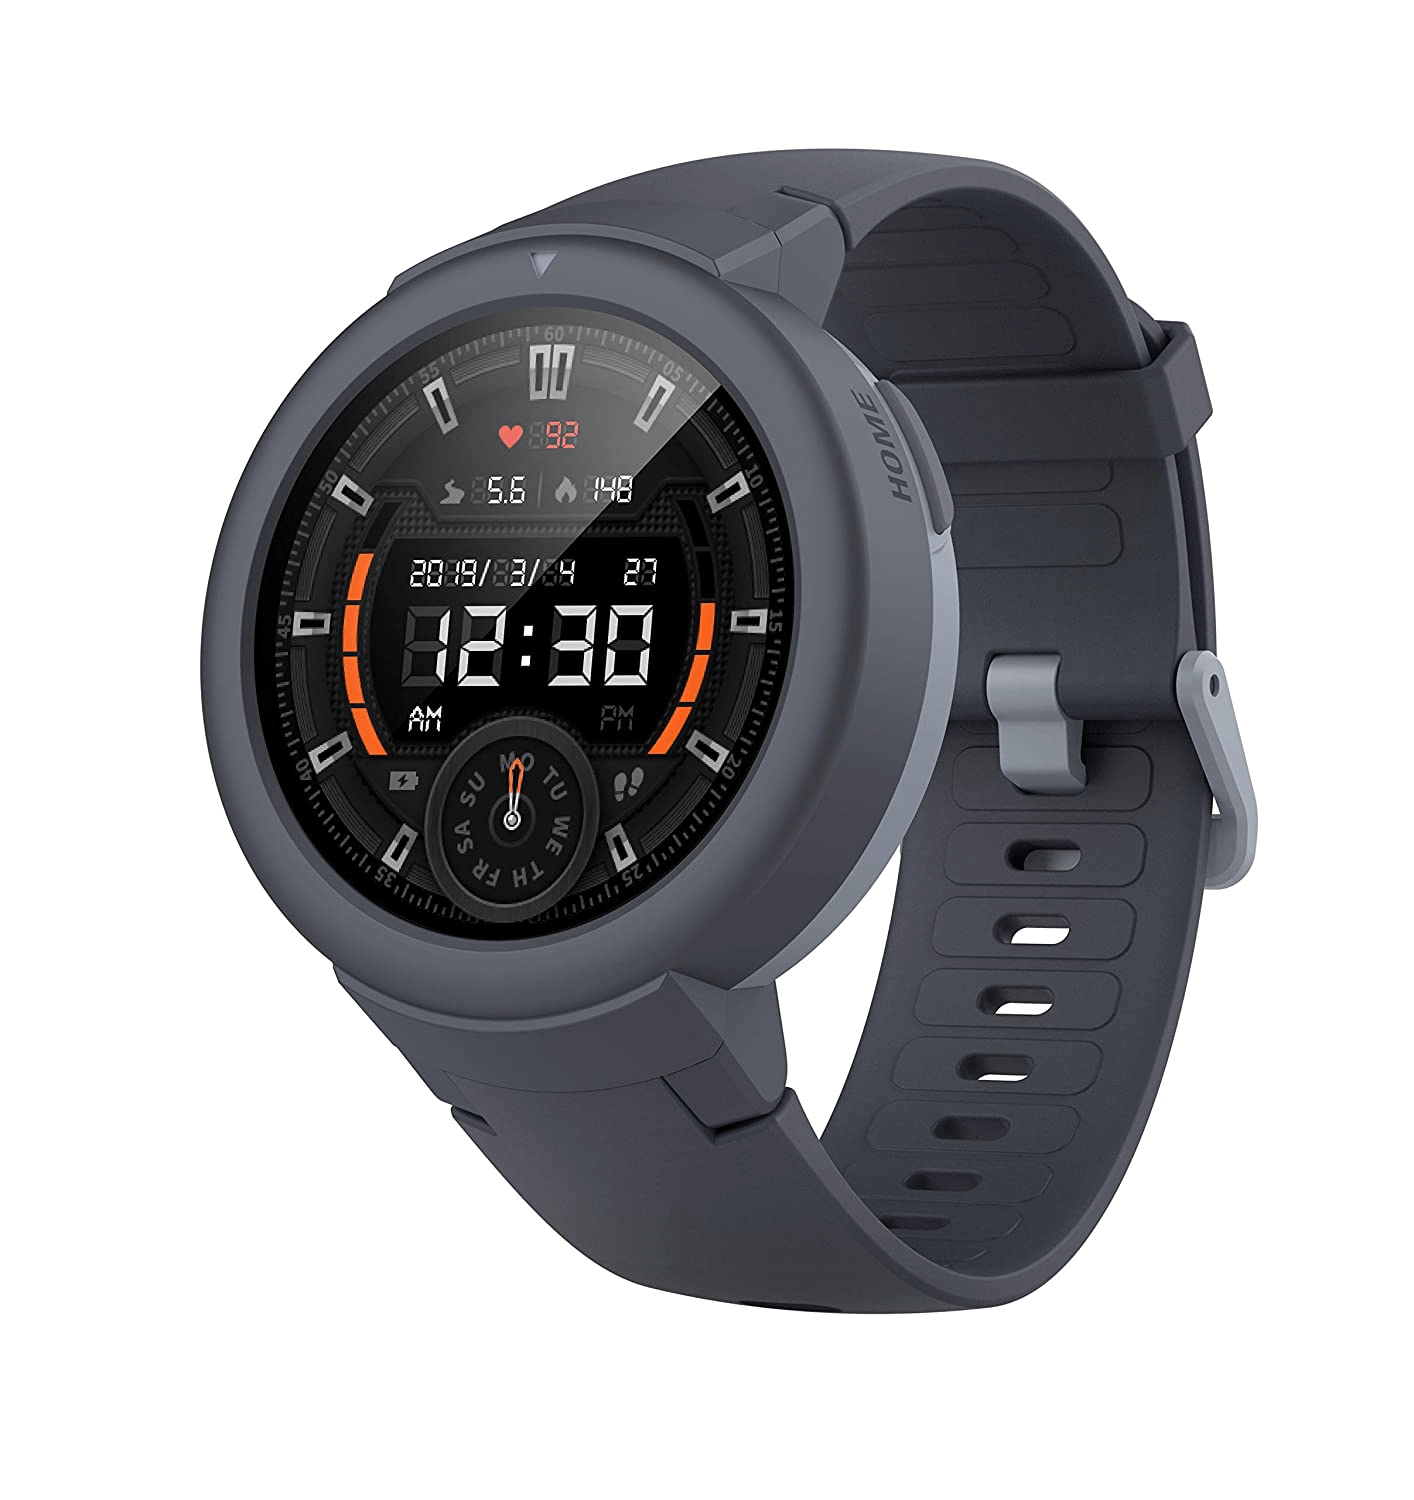 Amazfit Verge Lite IP68 Smart Watch GPS GLONASS Long Battery Life AMOLED Display for Android and iOS - Shark Gray